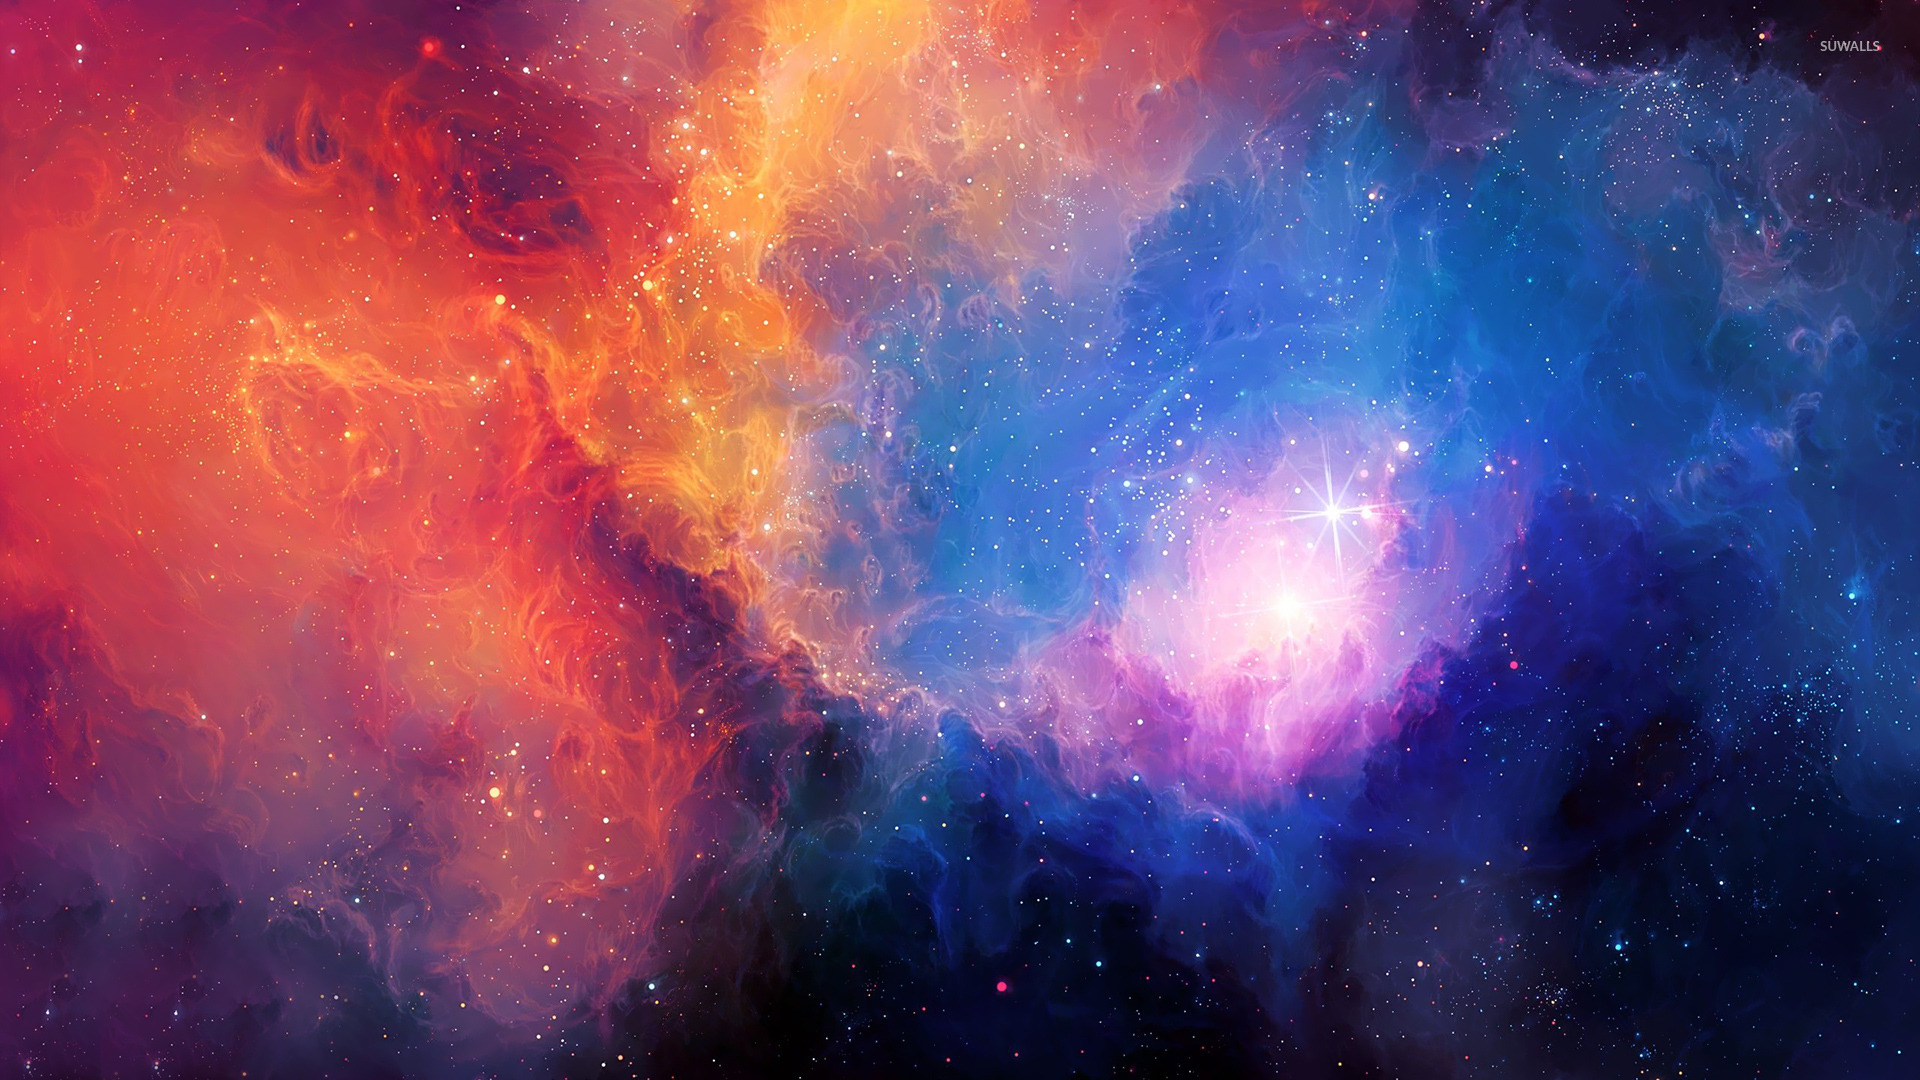 Colorful nebula wallpaper   Space wallpapers   21963